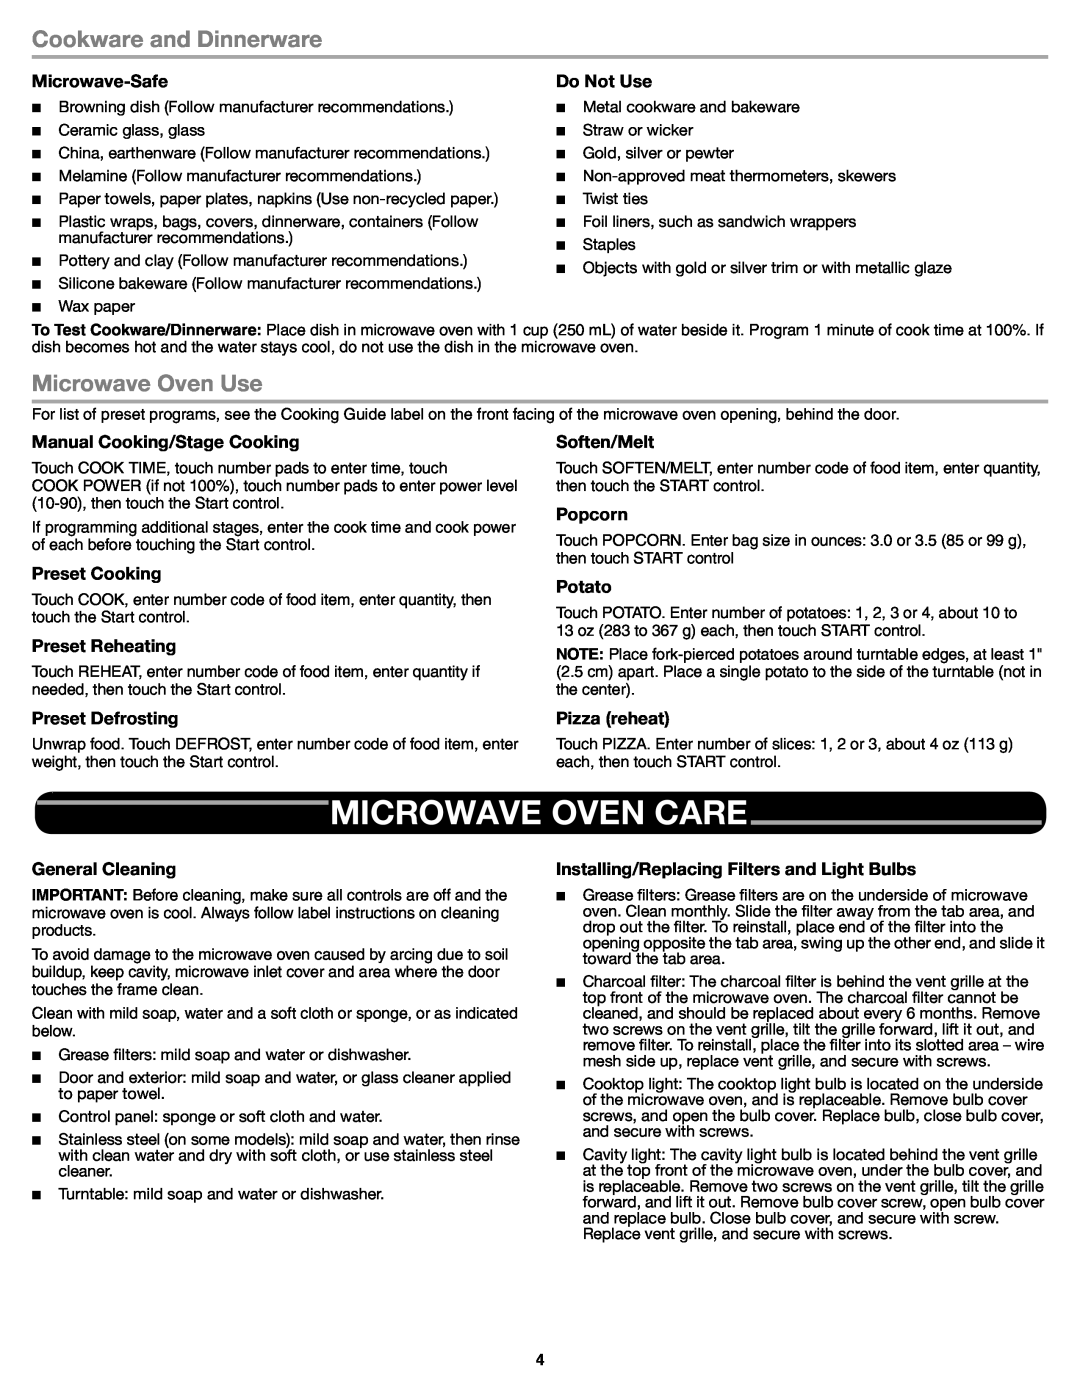 Whirlpool W10545083A important safety instructions Microwave Oven Care, Cookware and Dinnerware, Microwave Oven Use 